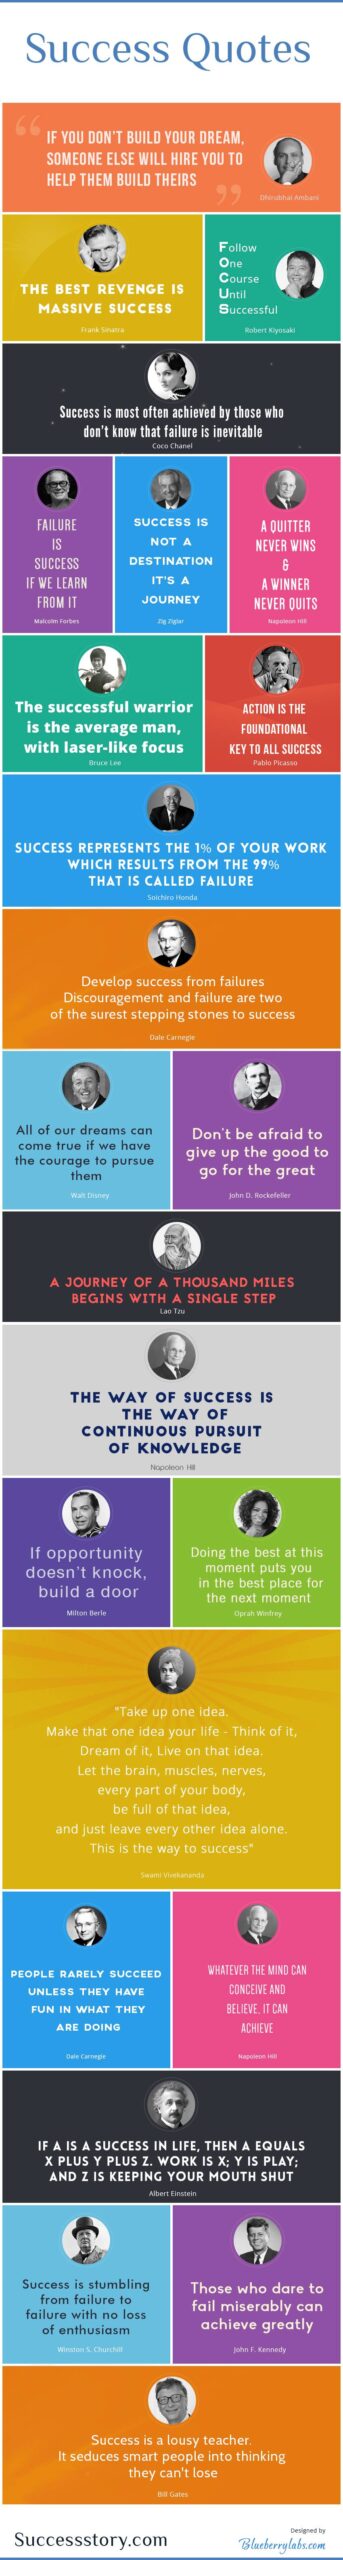 The 8 Biggest Predictors of Career Success (And Why Intelligence Isnt One) [Infographic]